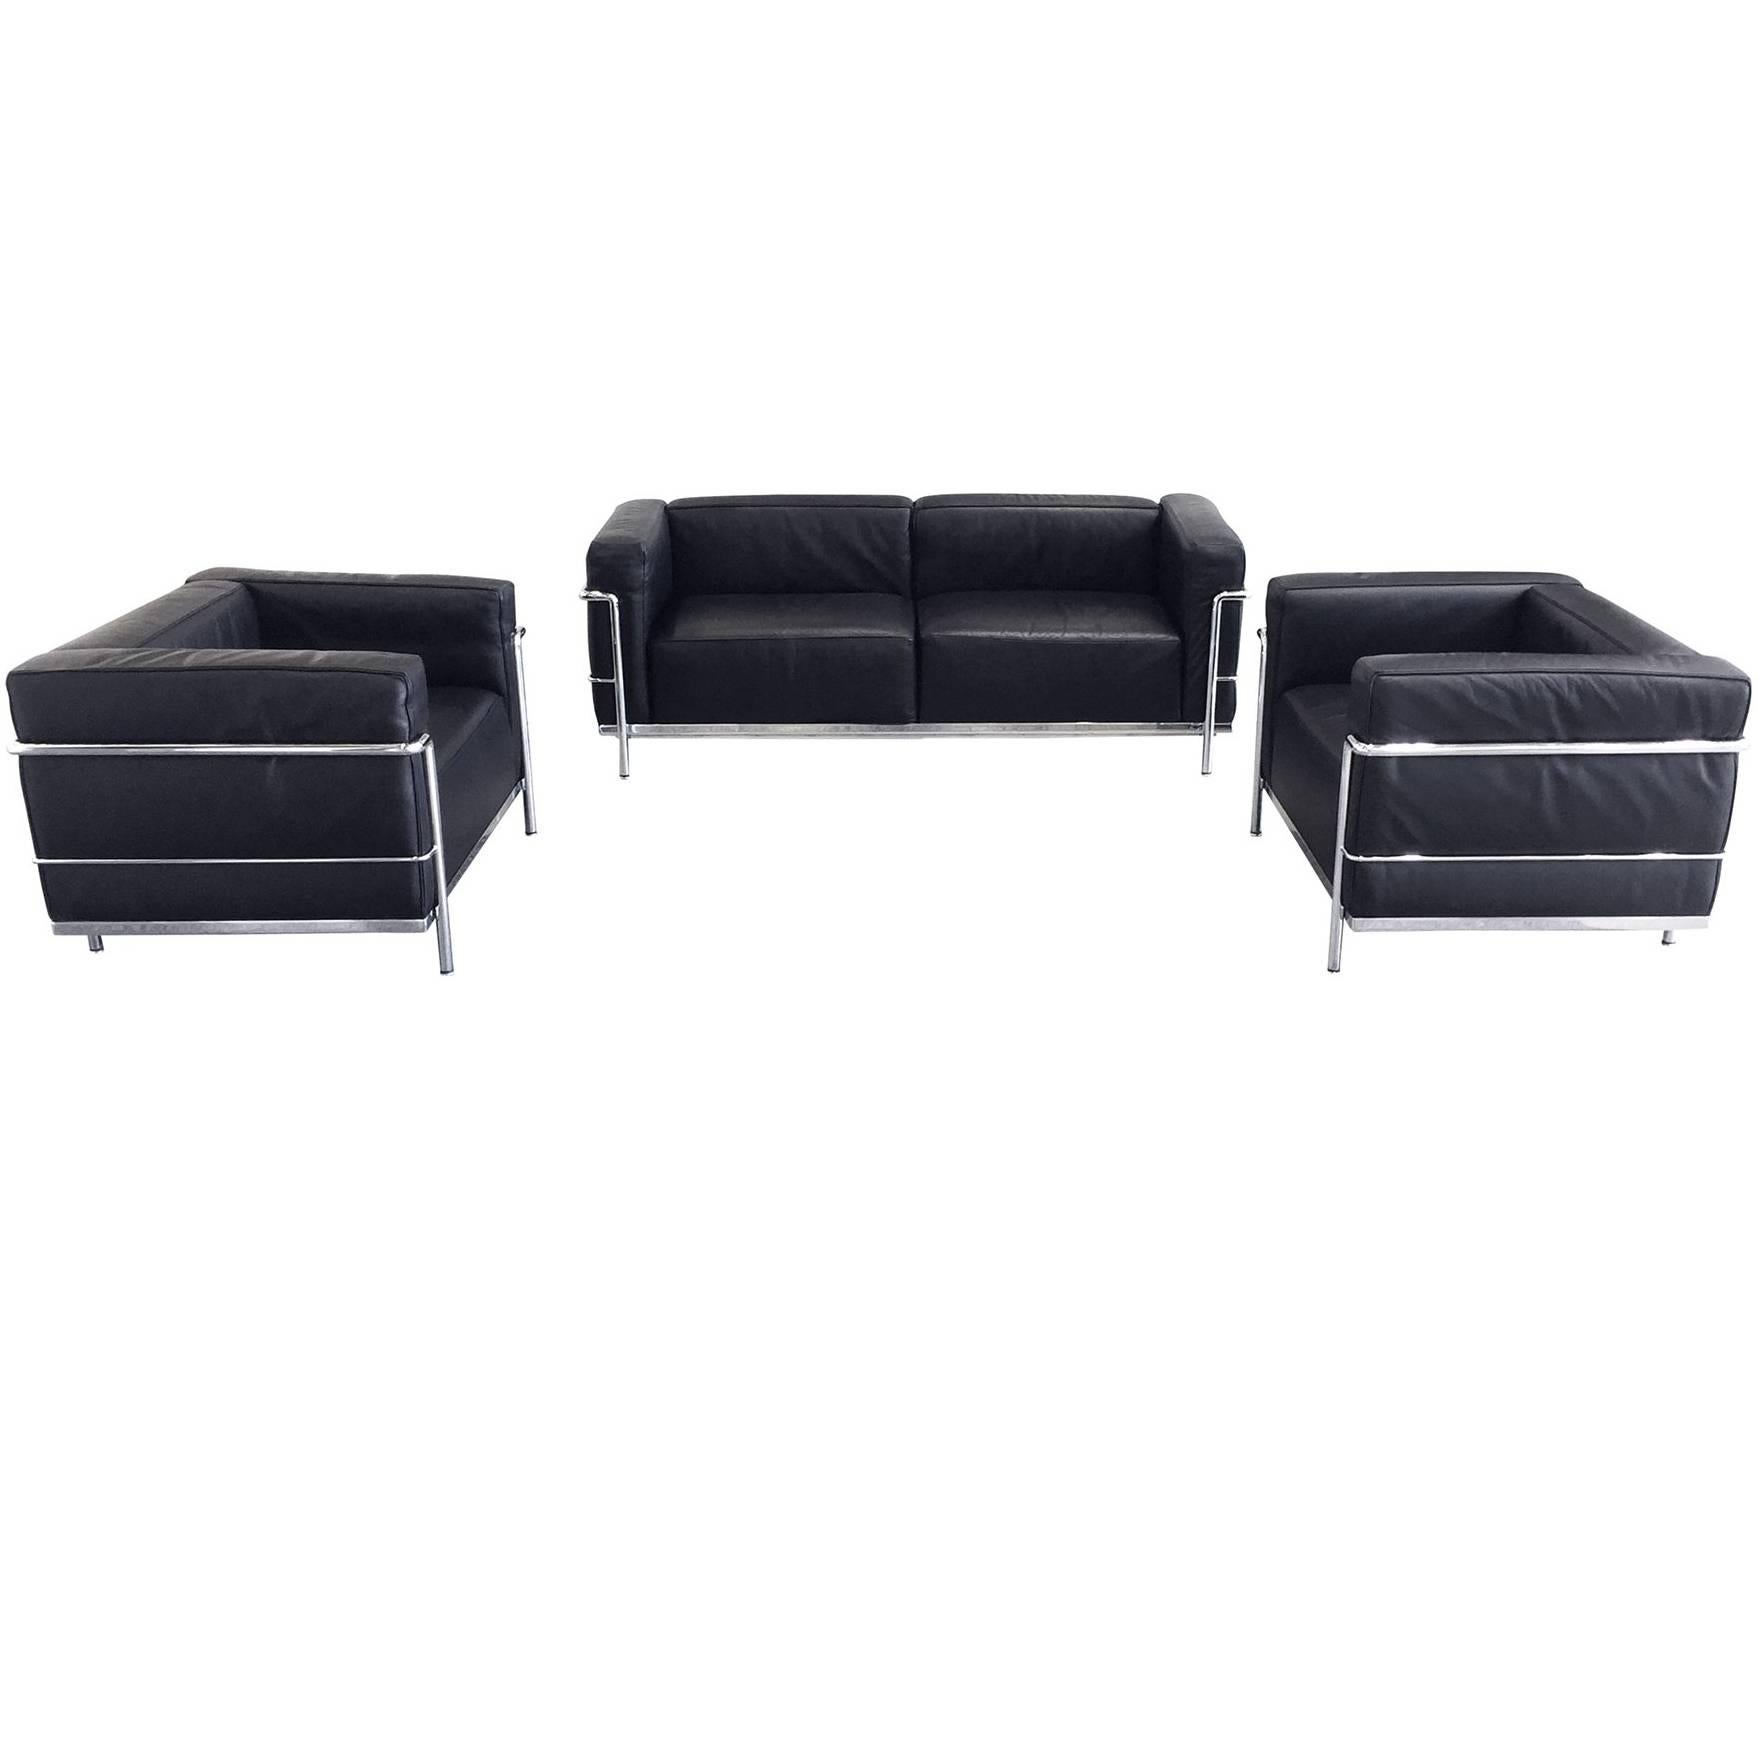 Le Corbusier Black Leather Sofa and Club Chairs by Cassina, Signed